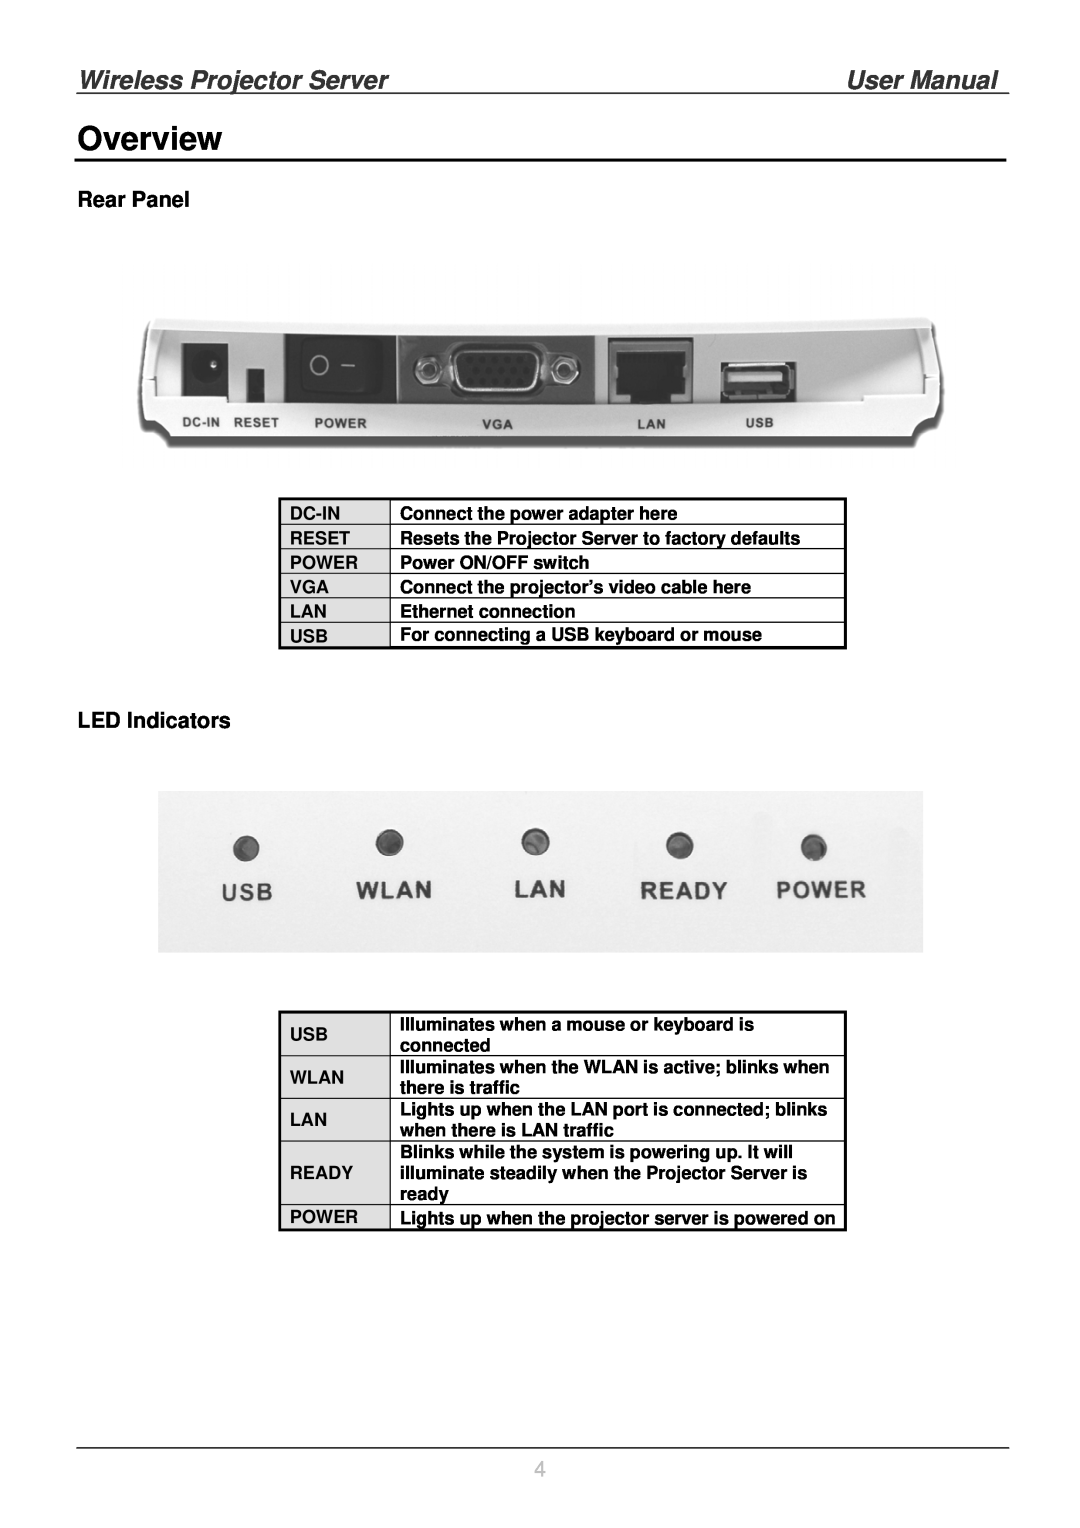 Lindy 32500 user manual Overview, Wireless Projector Server, User Manual, Rear Panel, LED Indicators 